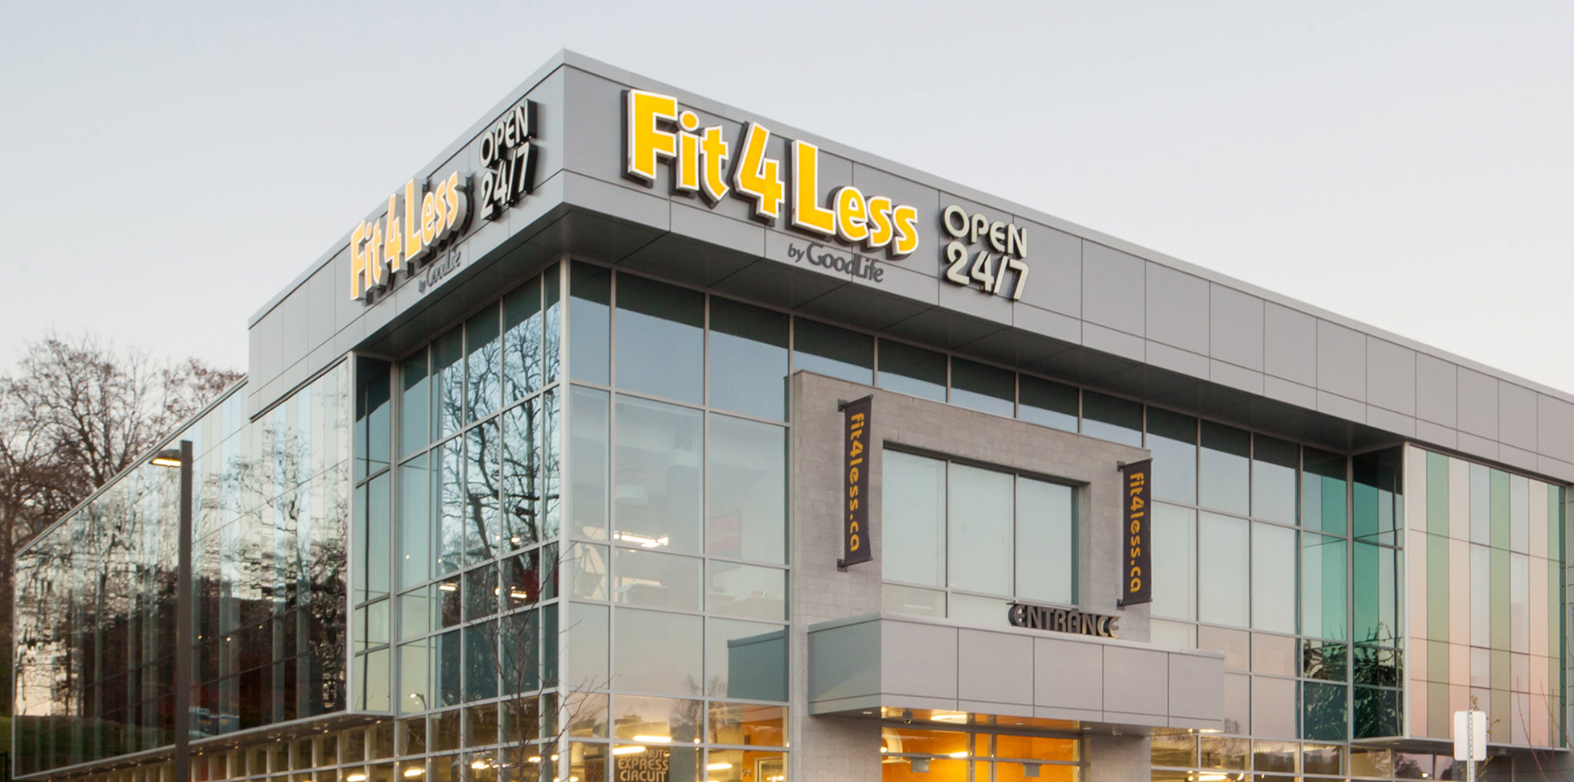 Exterior of a 24/7 Fit4Less Gym